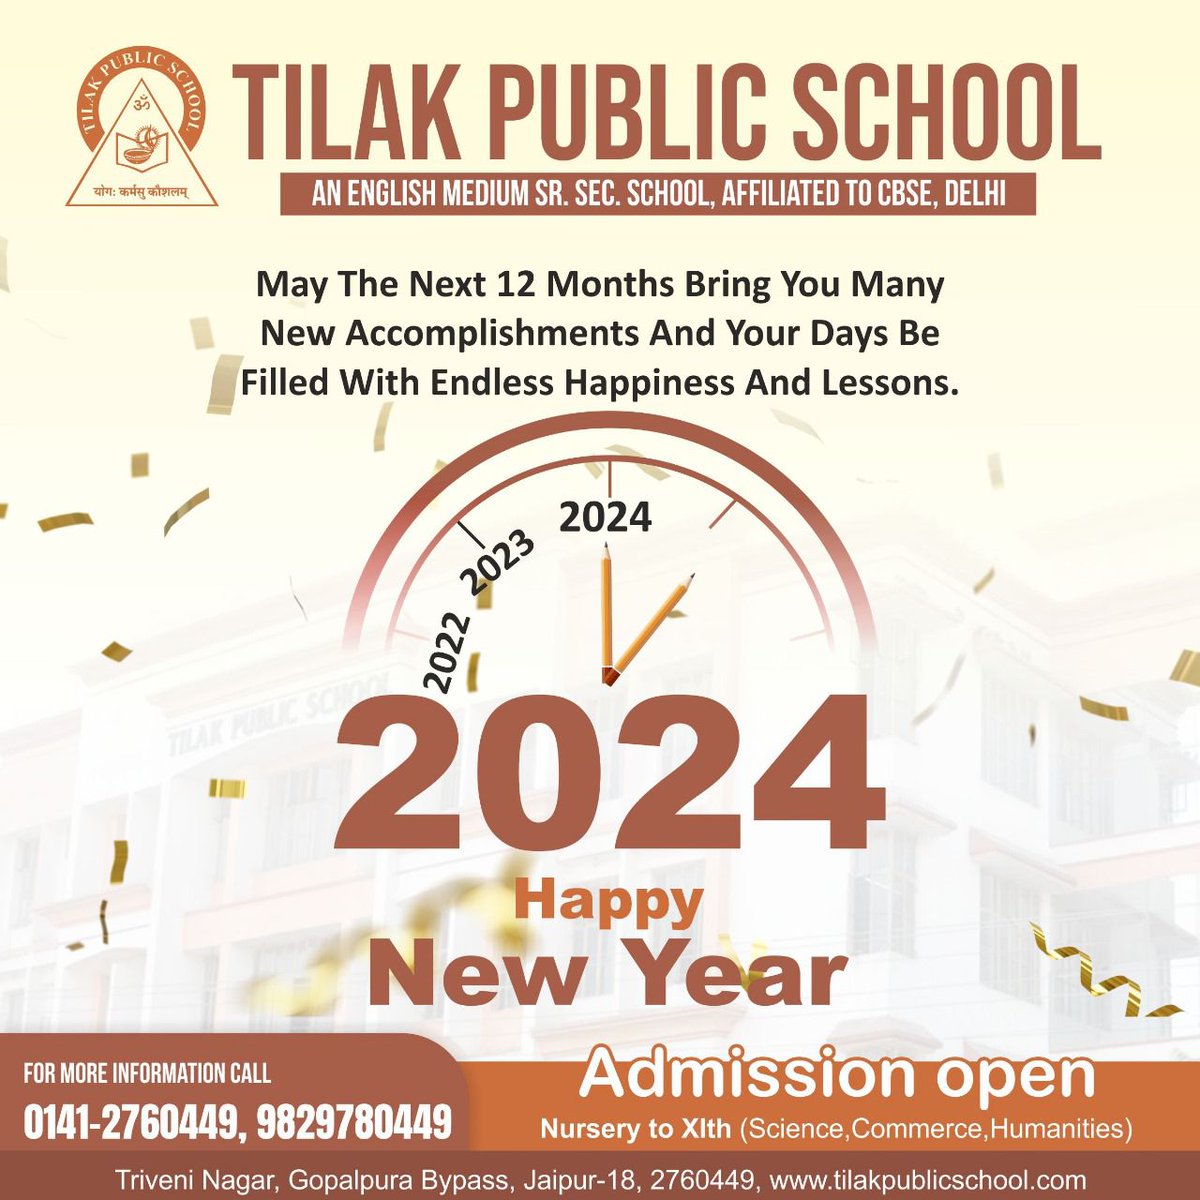 Wishing you and your family a Happy New Year filled with hope, health, and happiness - with a generous sprinkle of fun!  #newyear #happynewyear #newyear2024 #bestwishes #celebrations #tilakpublicscooljaipur #bestschoolinjaipur #schoolinjaipur